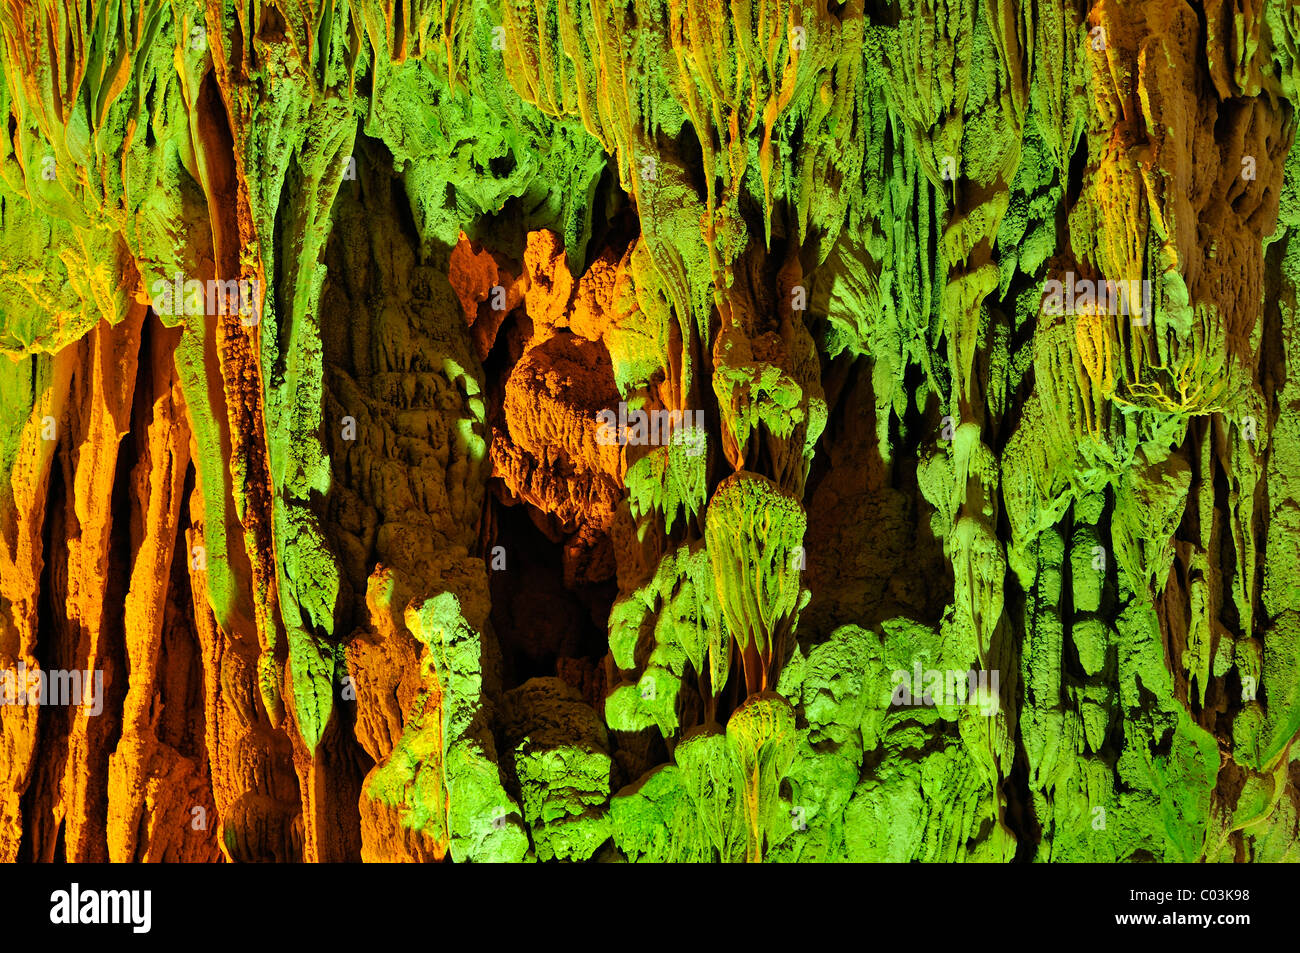 Hang Sung Sot, Cave of Surprises, stalactite cave in Halong Bay, Vietnam, Southeast Asia Stock Photo